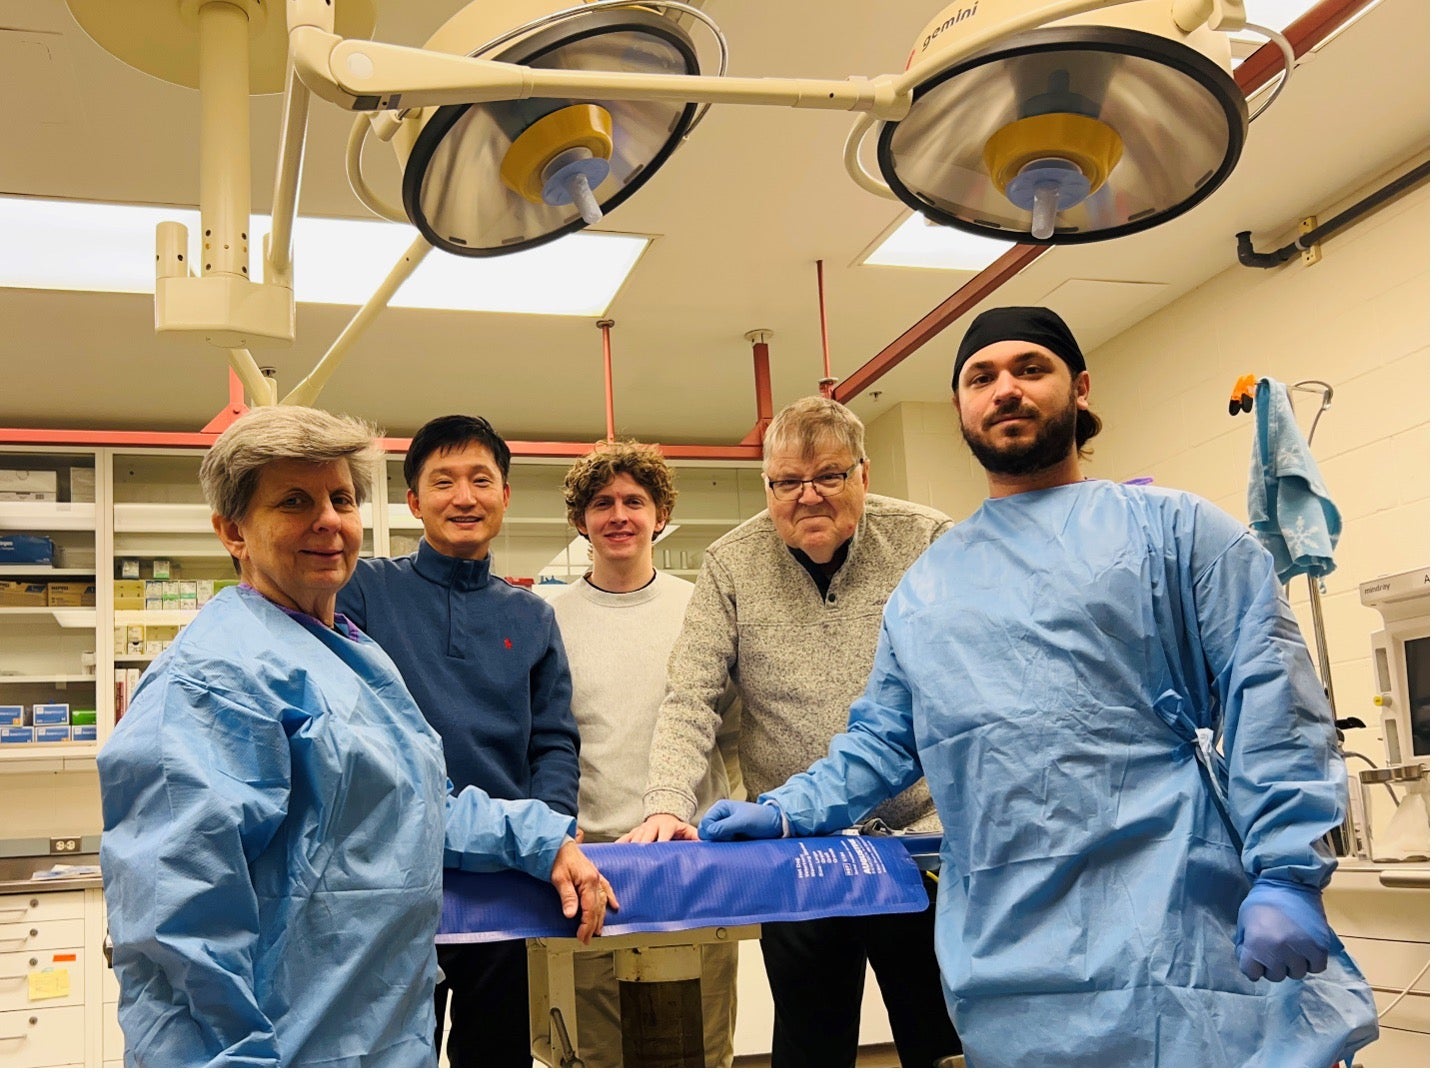 Researchers from Dr. Seungyup Lee's lab gather in a medical room to pose for a group photo.